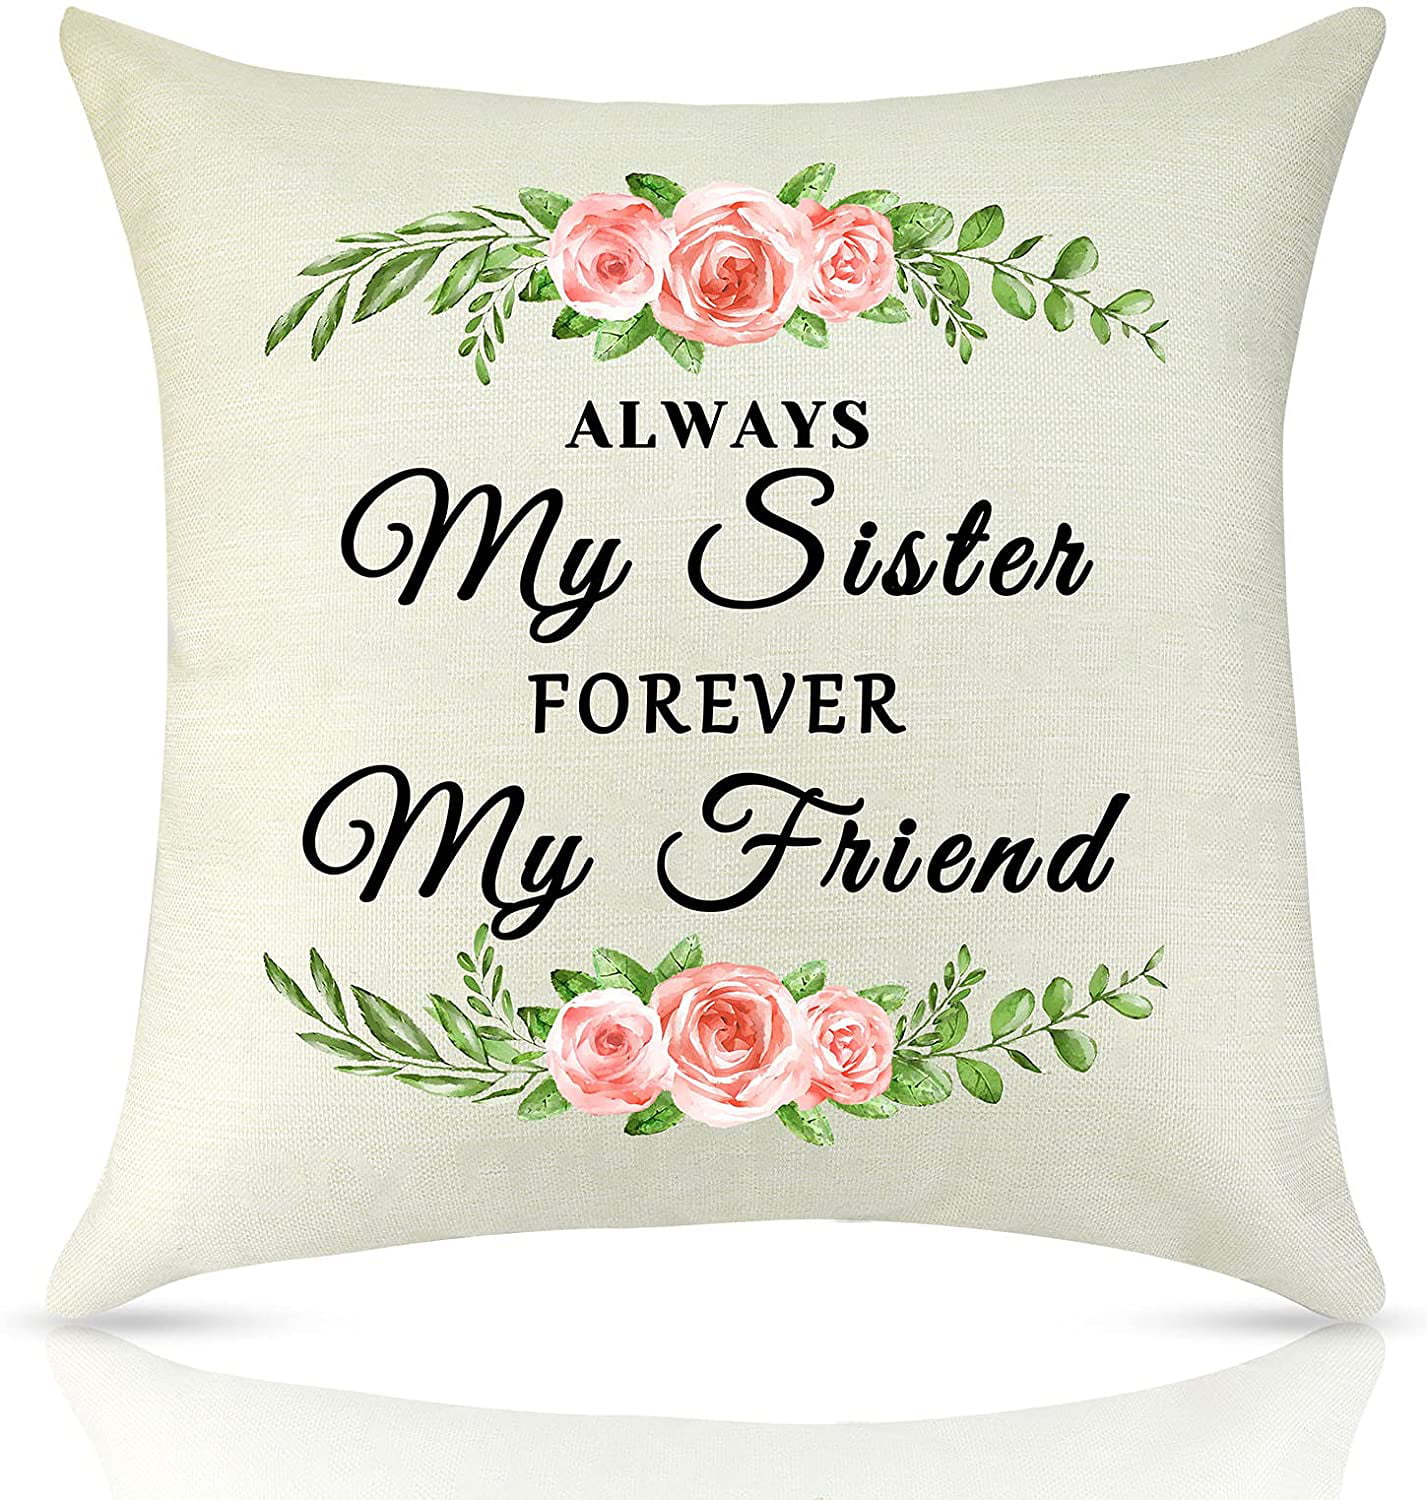 Sister Cushion Cover Best Sister Gifts for Sisters Best Friend Birthday for Sisters Friends Home Decoration Cotton Linen Cushion Pillow Case 45x45cm 